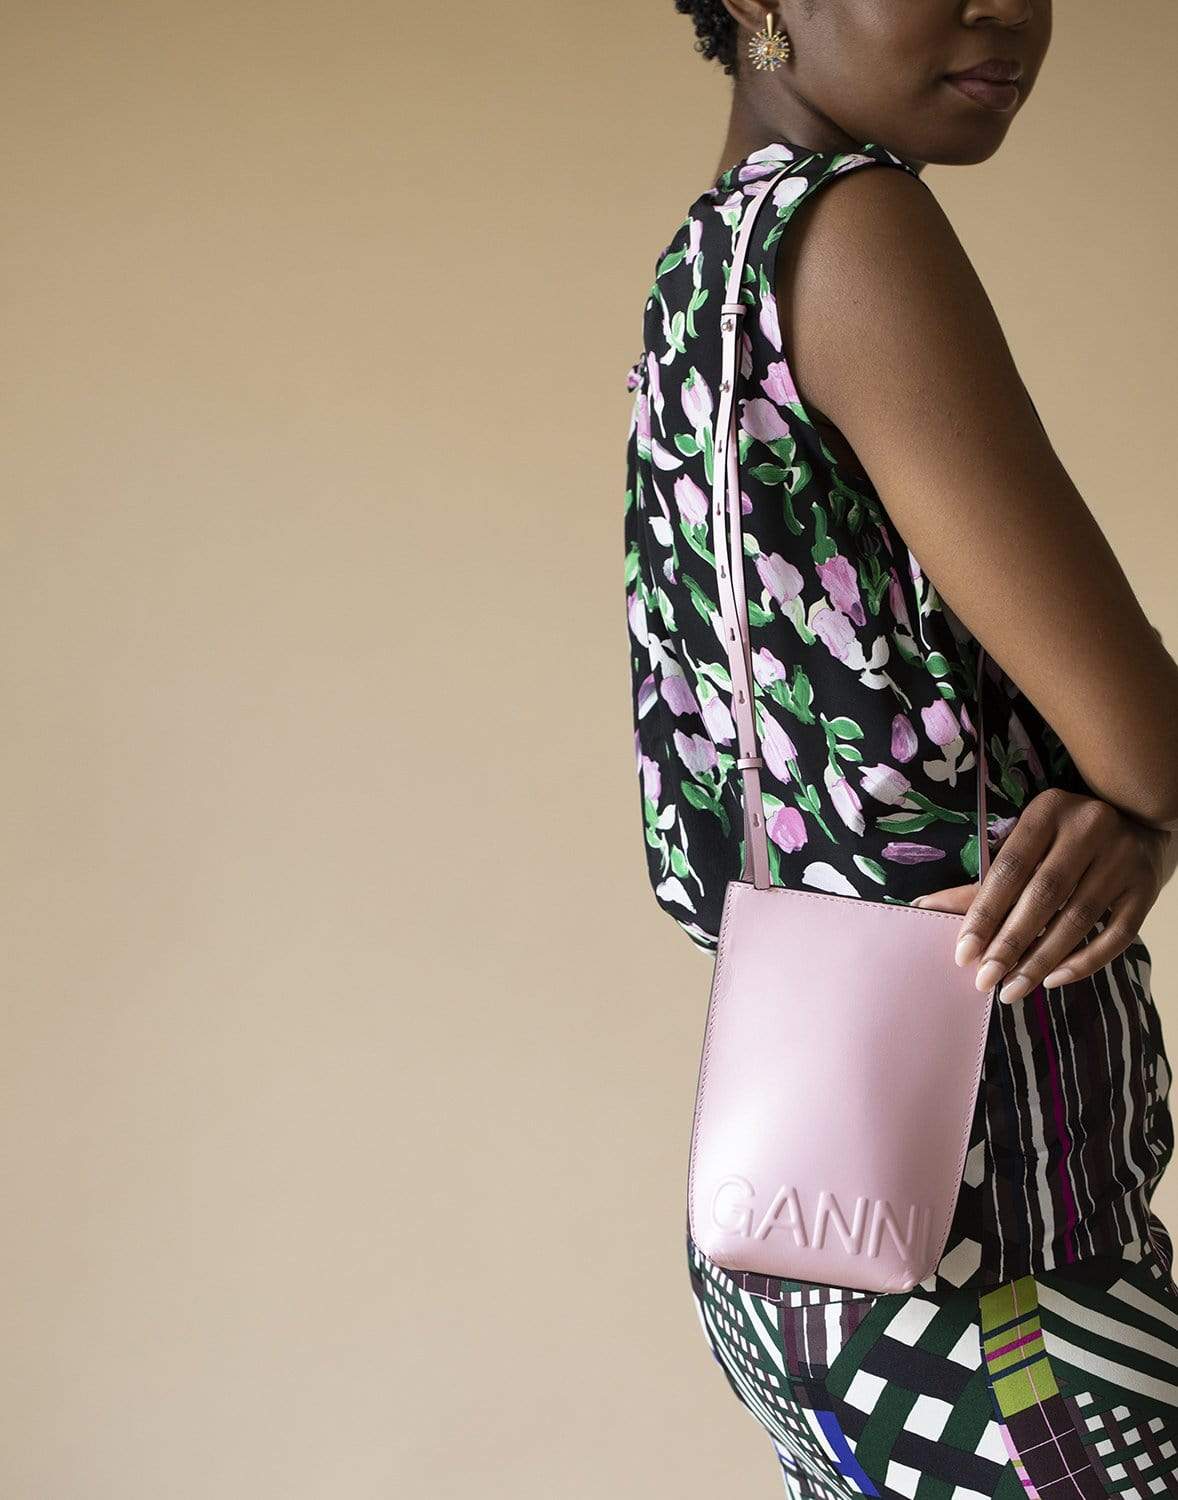 GANNI-Recycled Leather Pink Crossbody Mini Bag-PINK